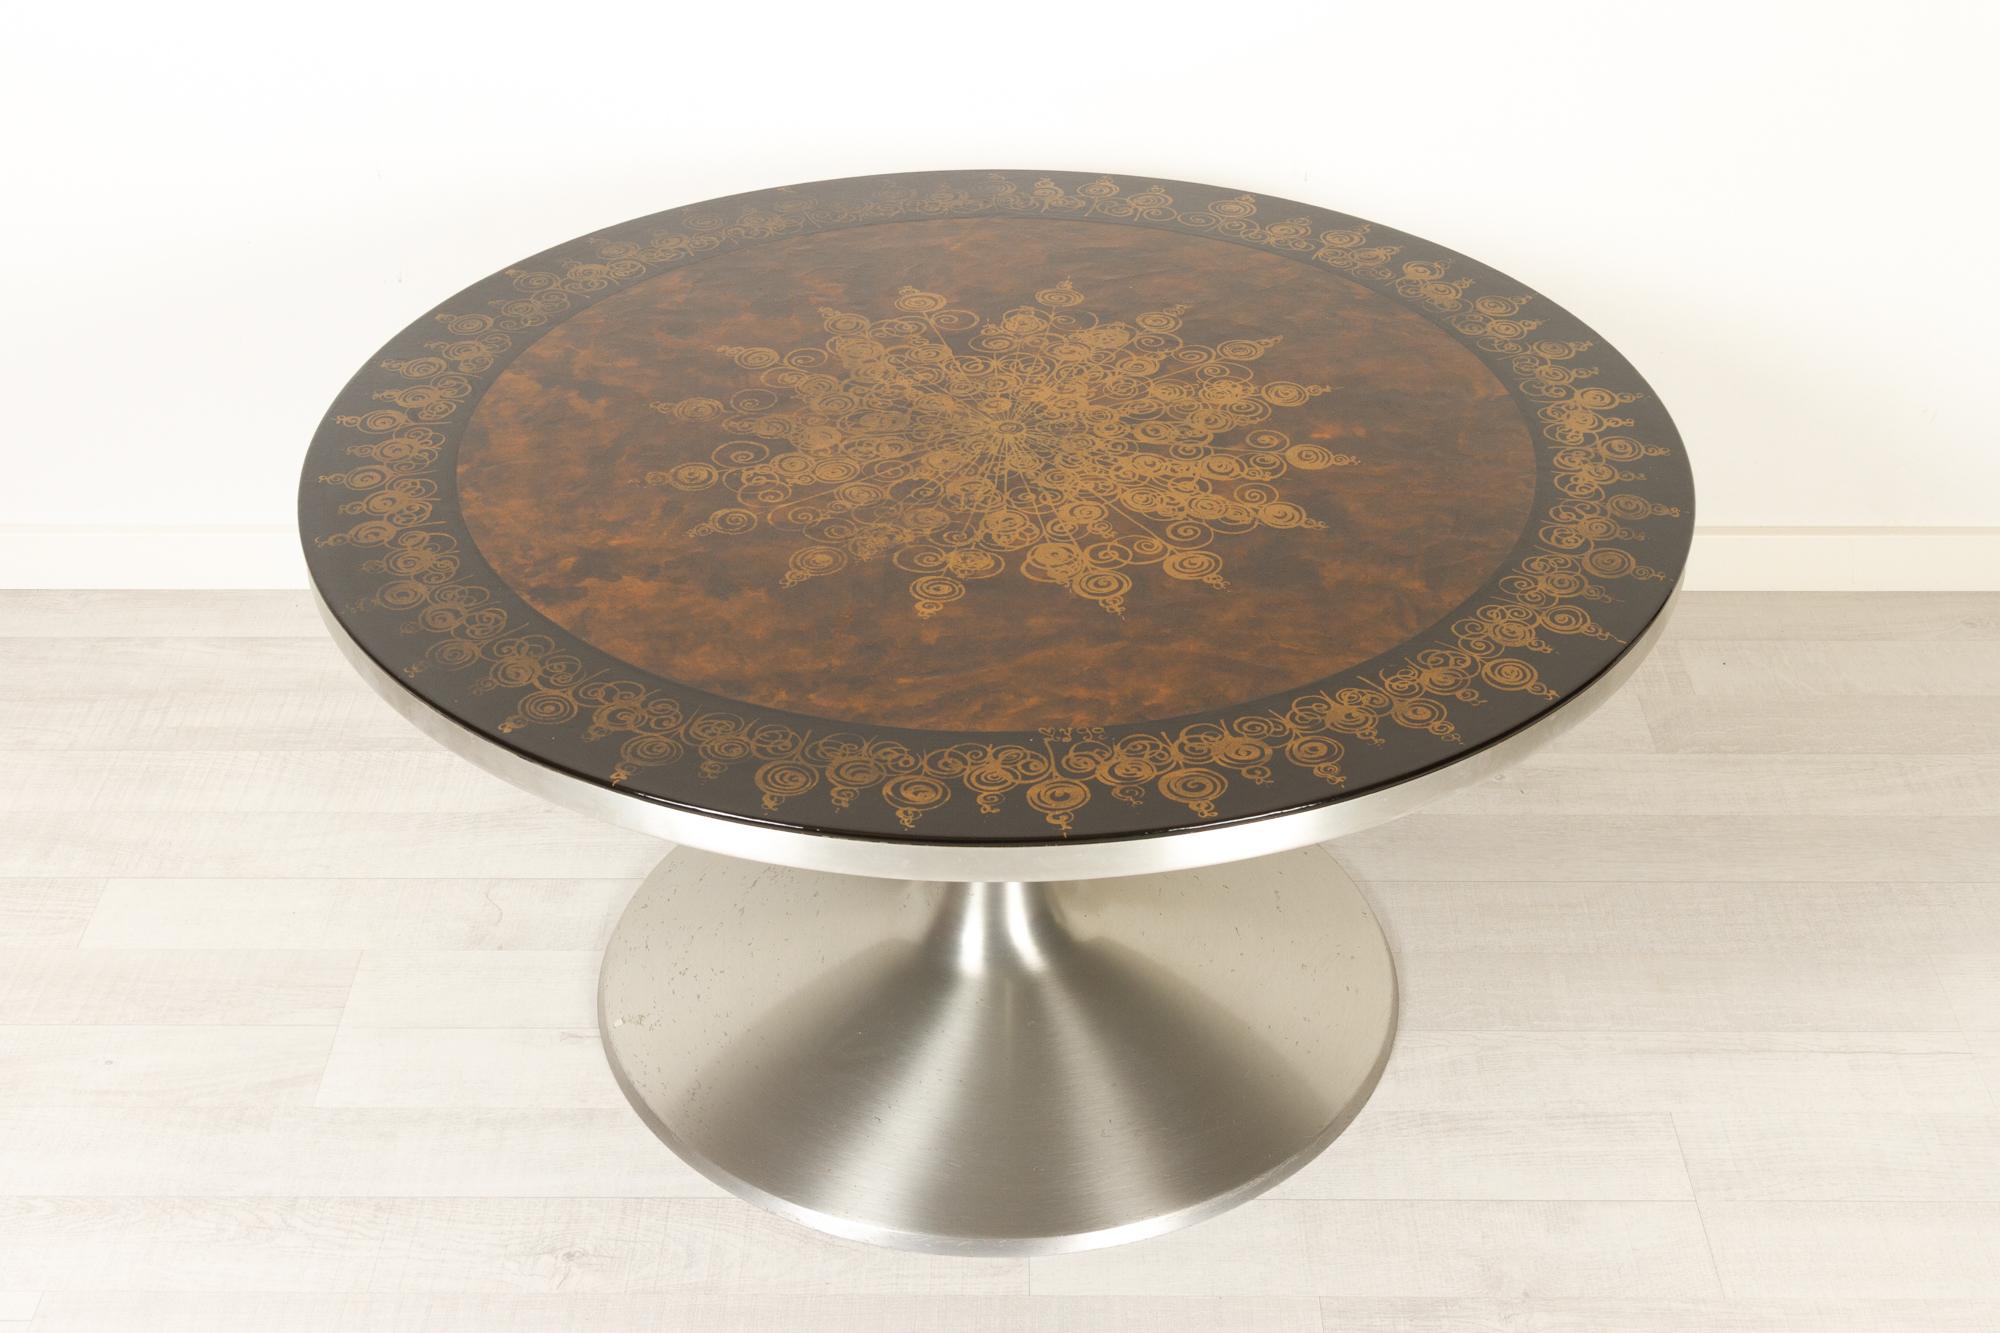 Vintage Danish coffee table by Poul Cadovius for Cado 1970s
Beautiful and spectacular round coffee table with aluminum tulip base designed by Poul Cadovius with graphics by Susanne Fjeldsøe aka 